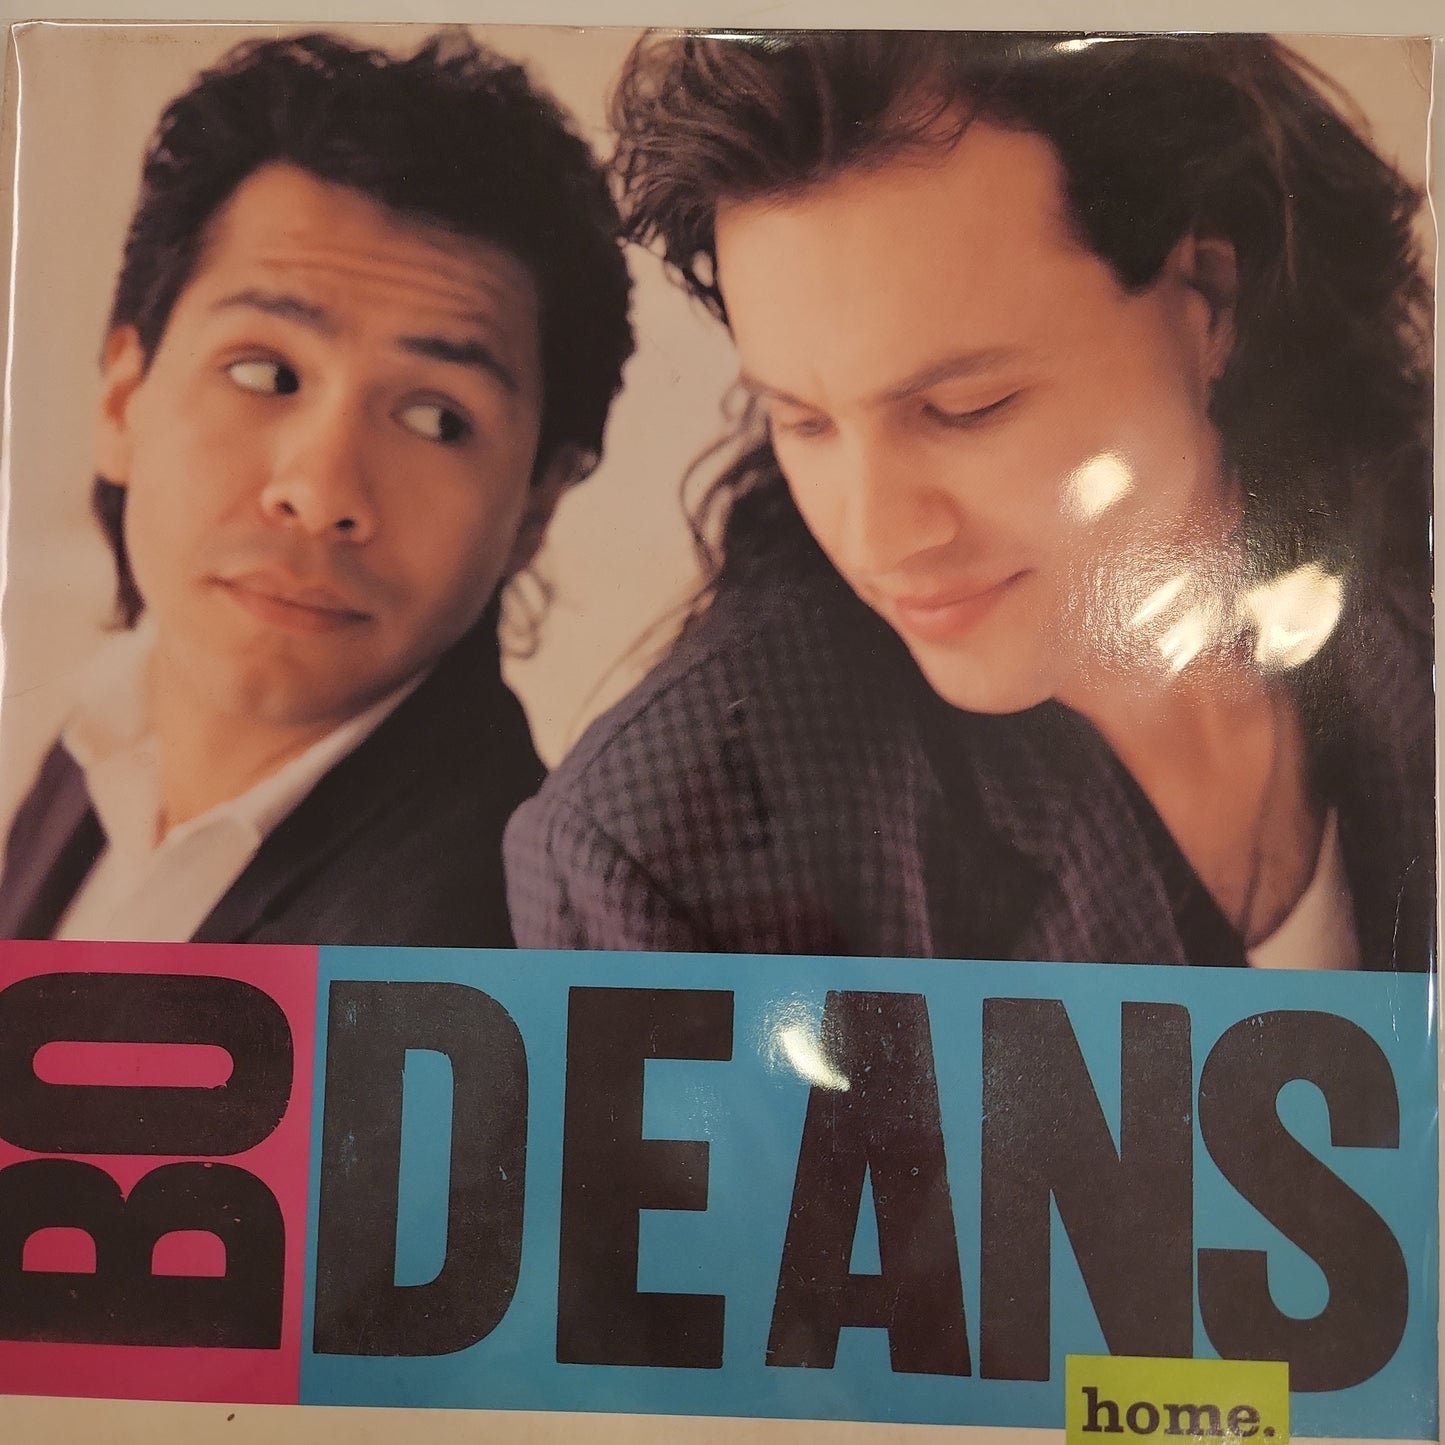 BoDeans - Home